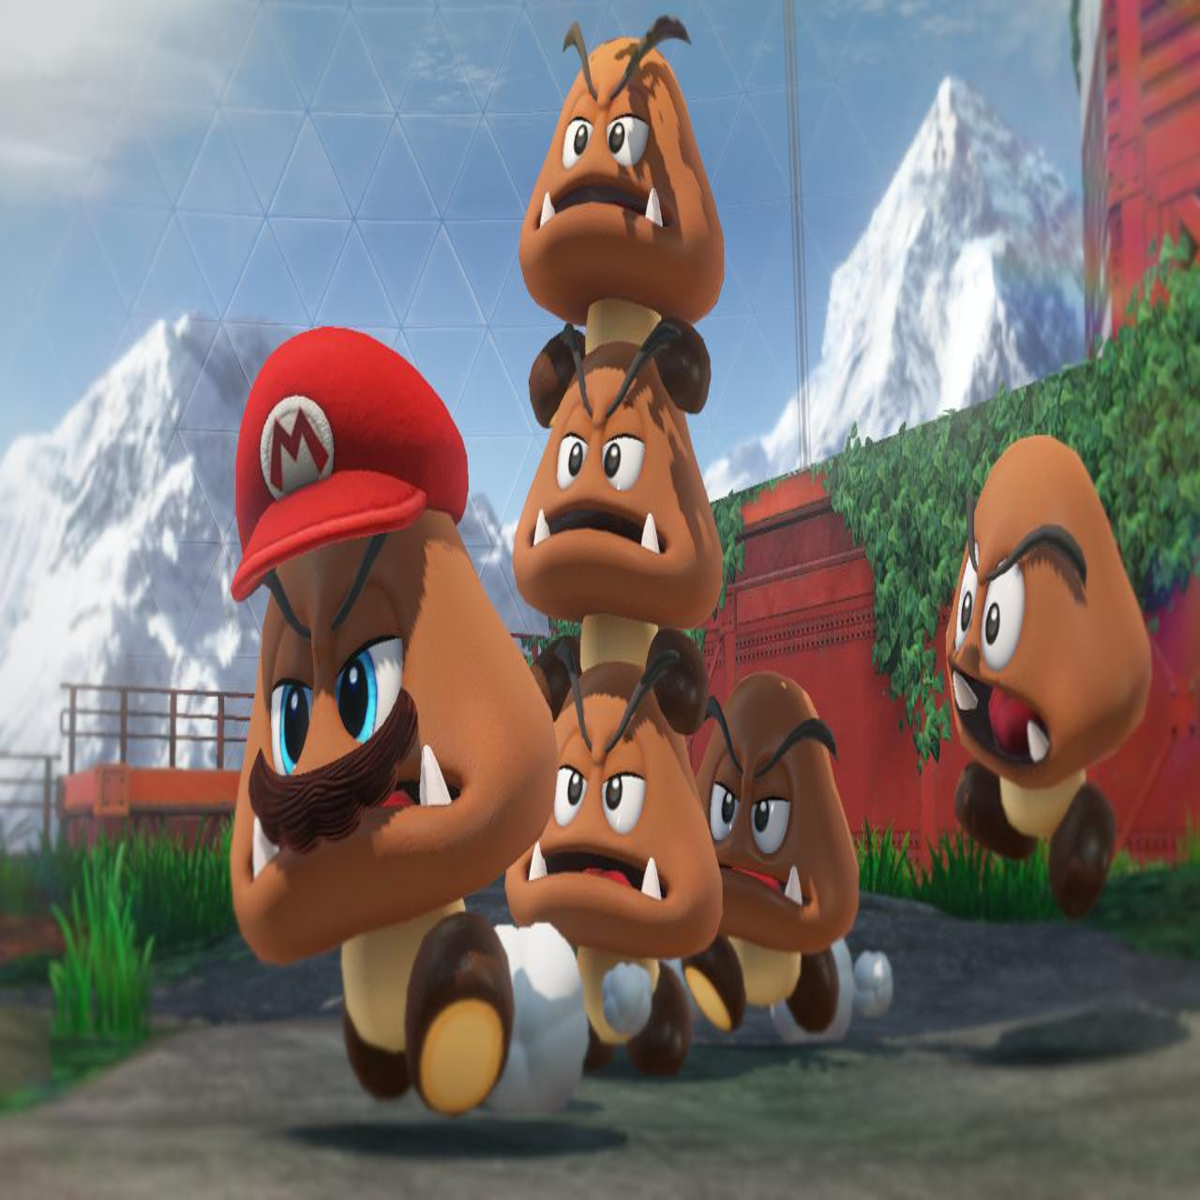 Super Mario Odyssey mod ups the Mario count with 10 player, online co-op